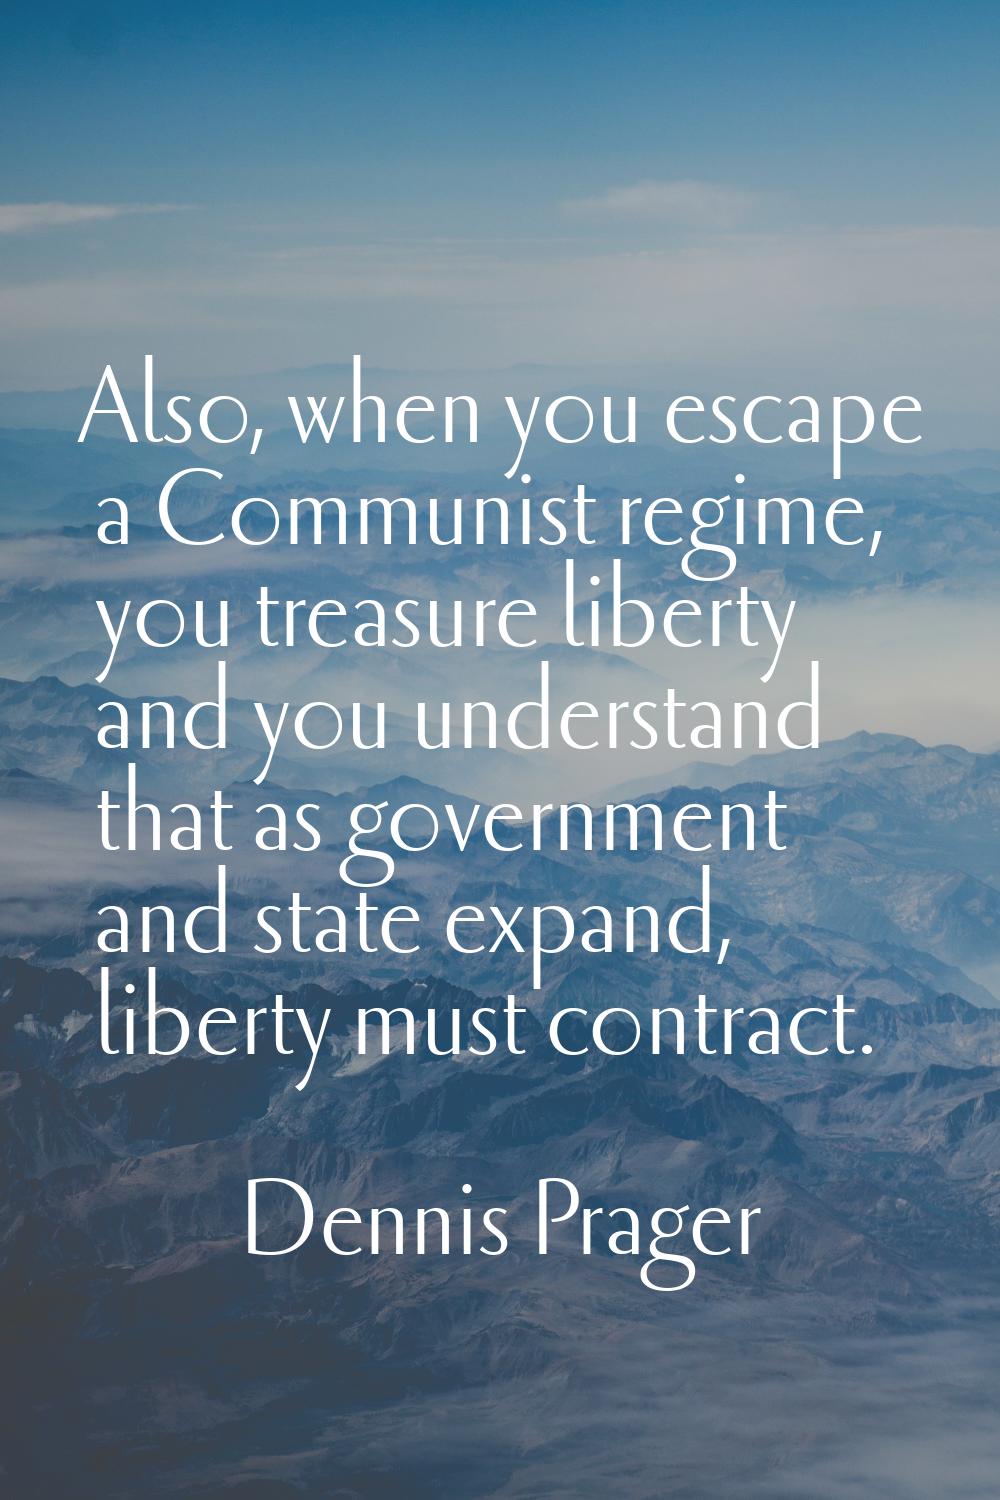 Also, when you escape a Communist regime, you treasure liberty and you understand that as governmen